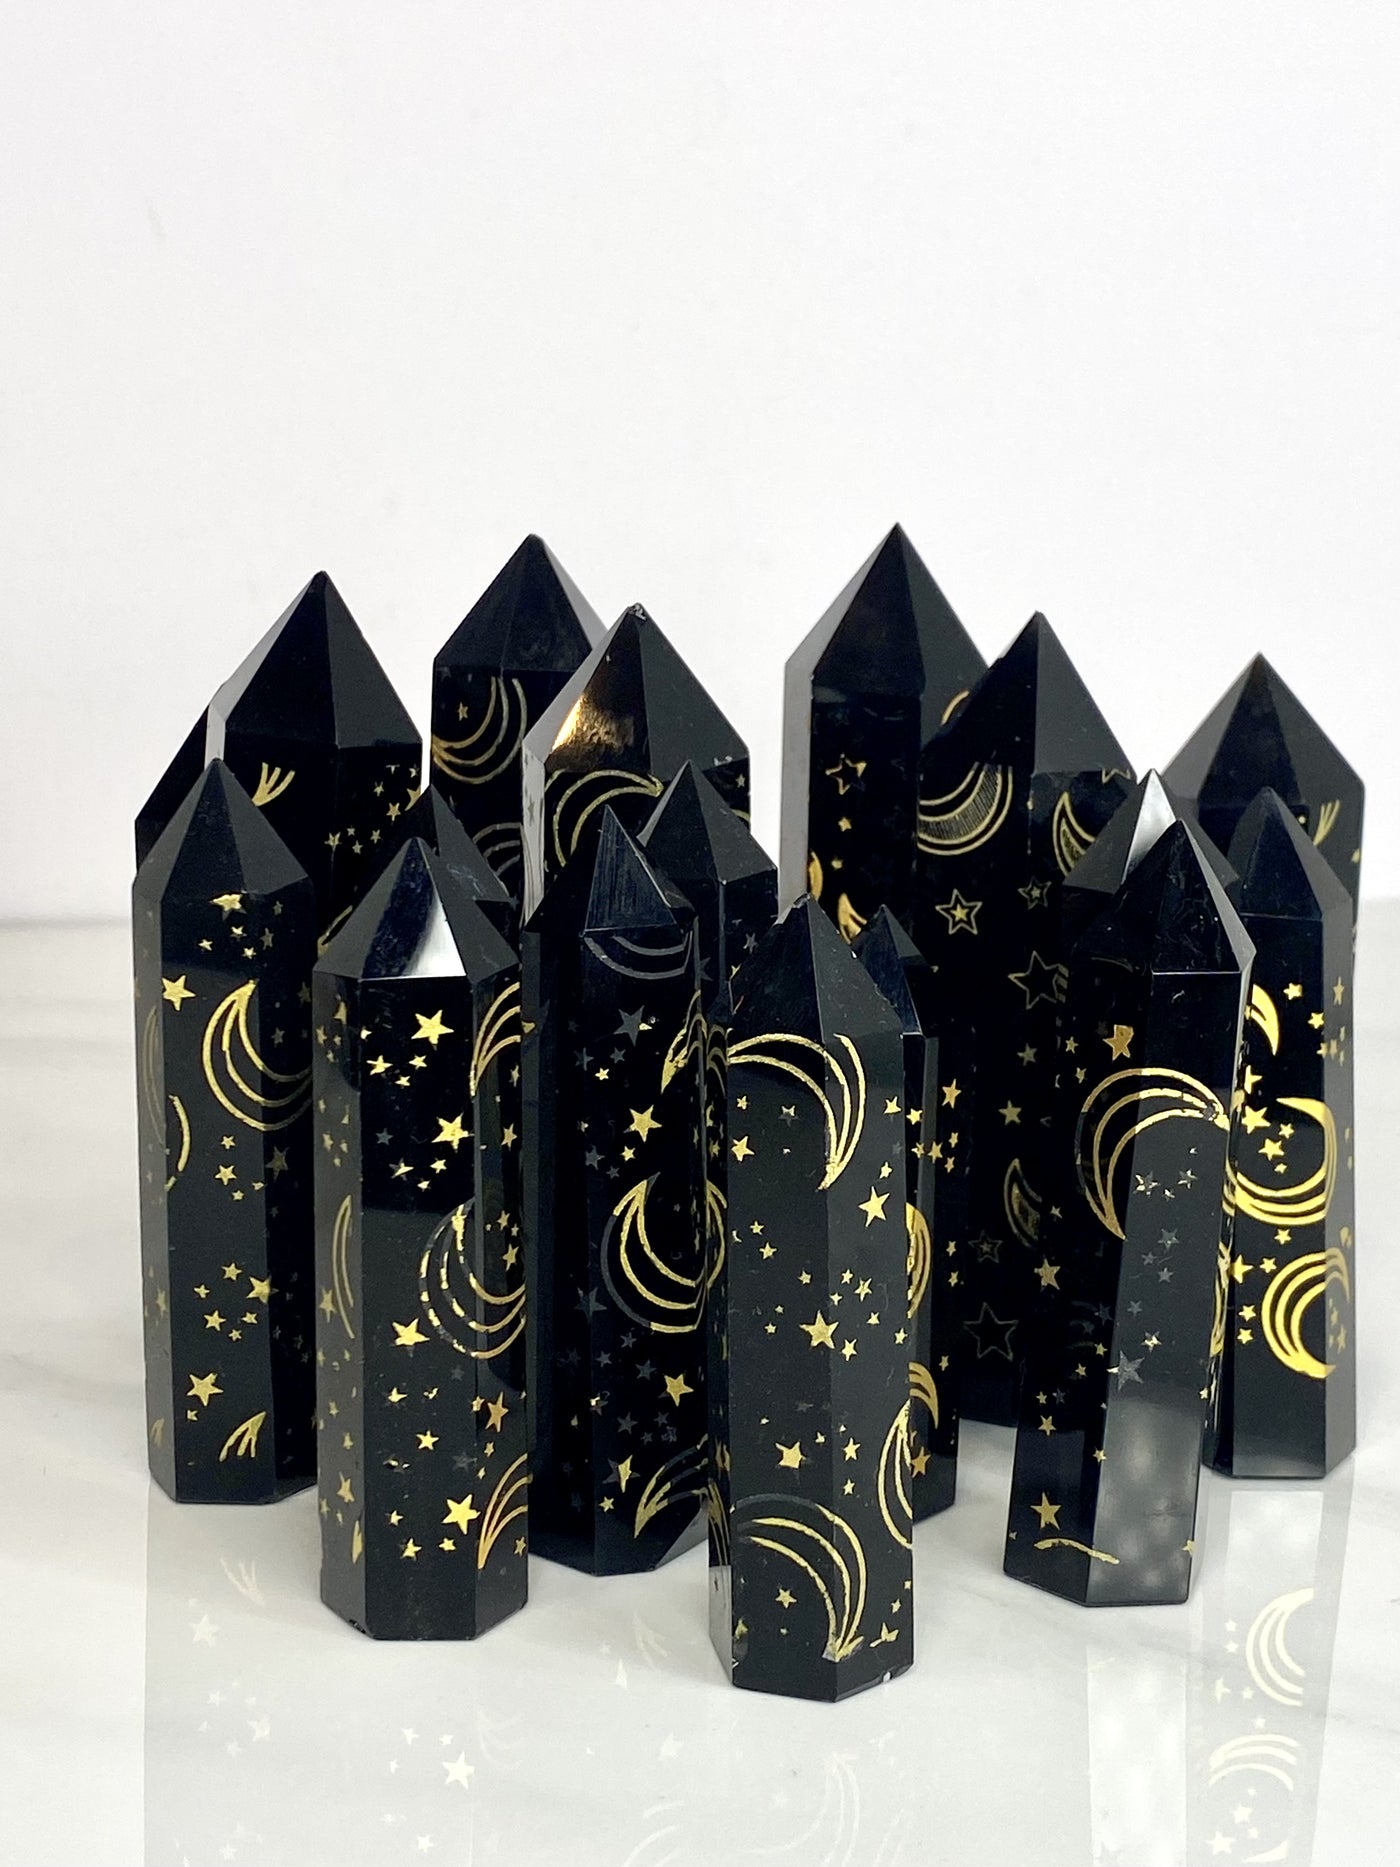 Illuminate Your Path with Black Obsidian Engraved with Gold Stars & Moons